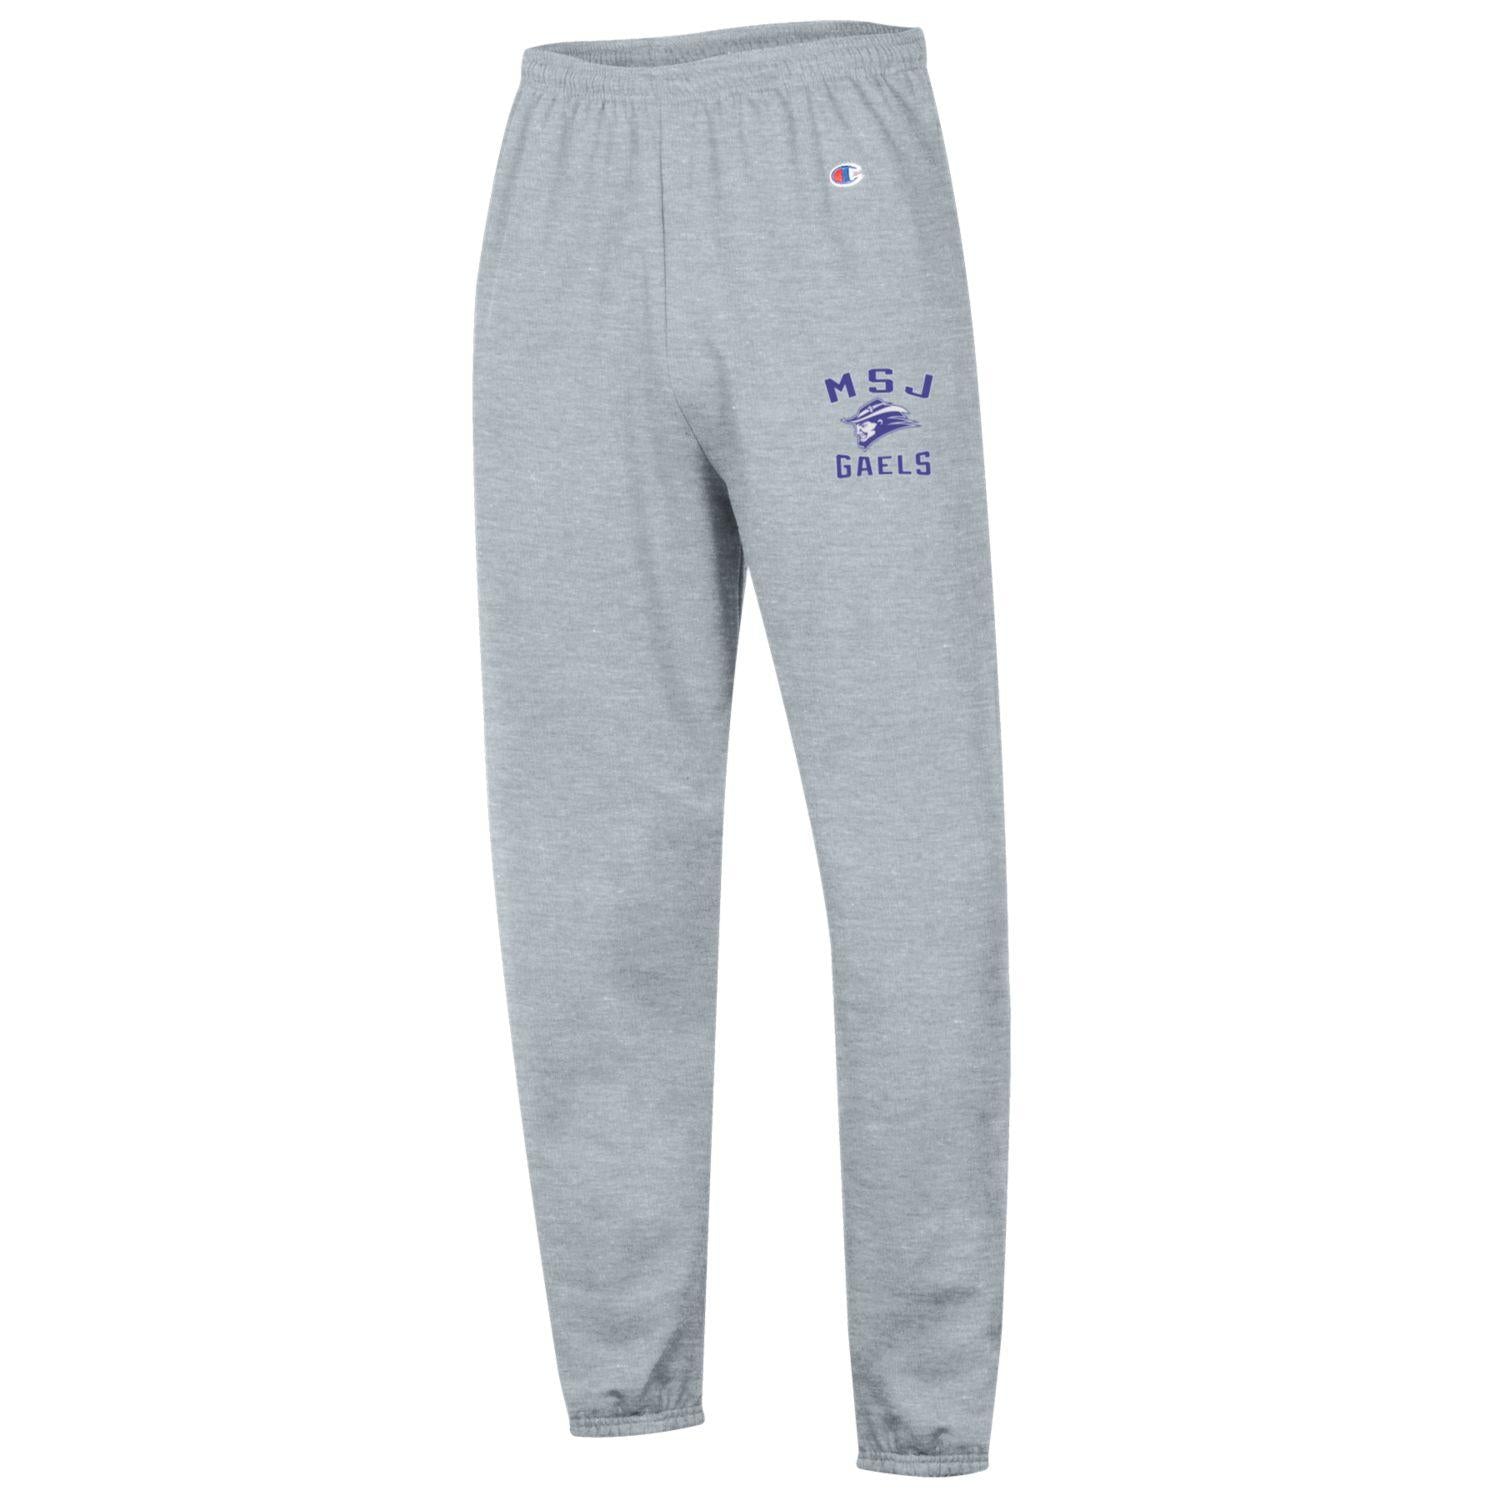 Barbarian Unisex Sweatpants. These Sweatpants are NOT Approved for PT. –  FortCarsonSwag